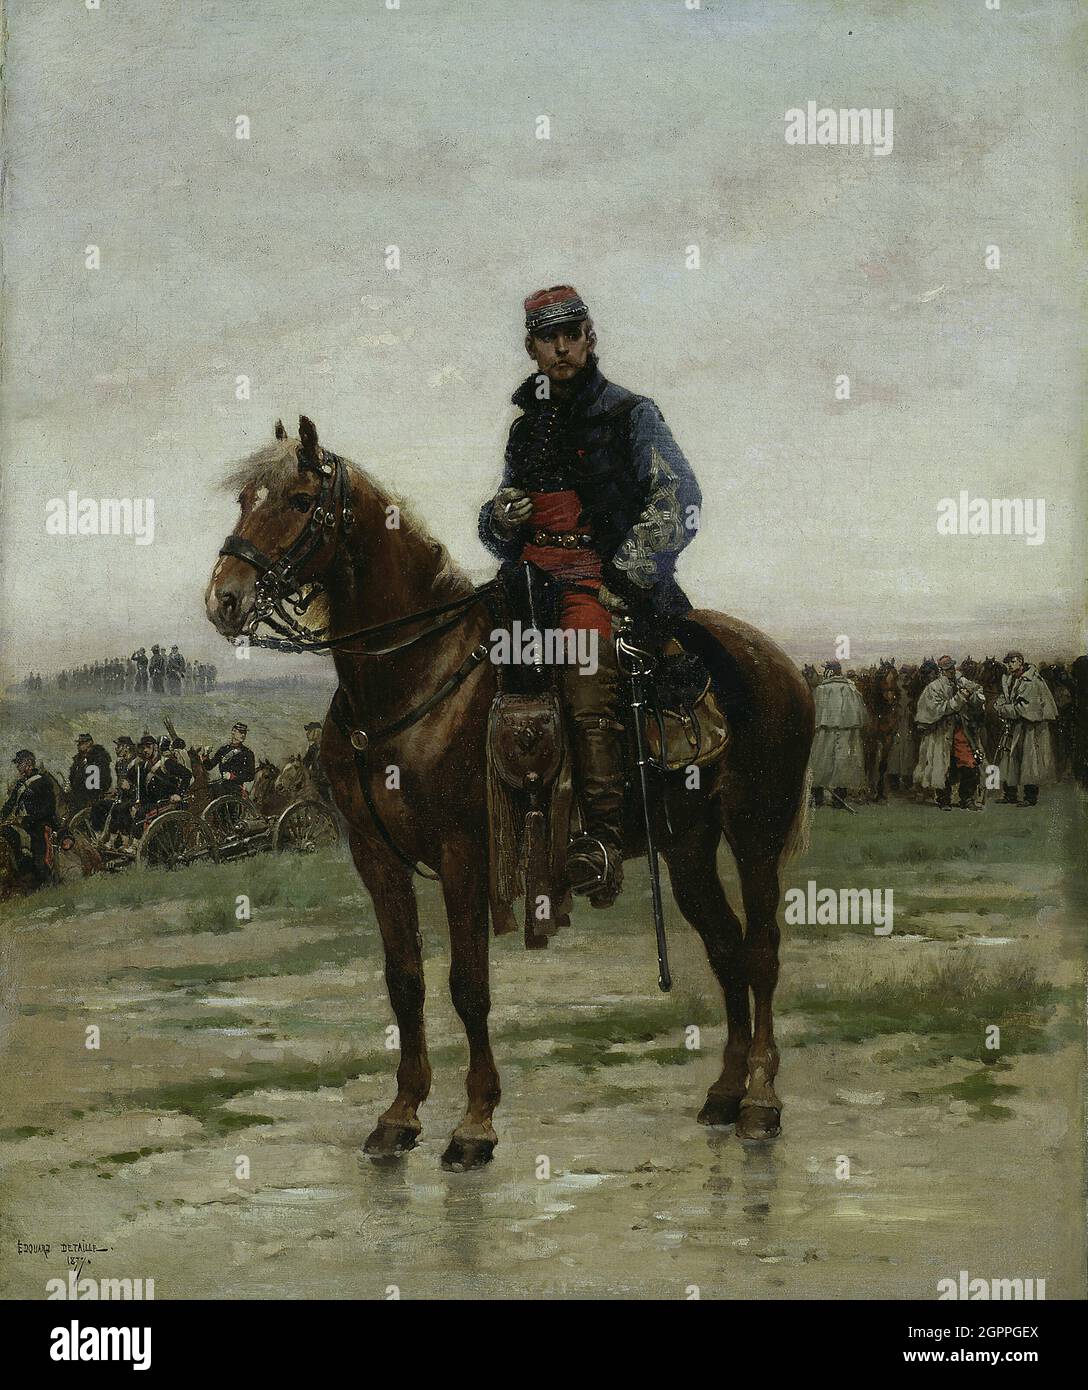 A Mounted Officer, 1877. Stock Photo